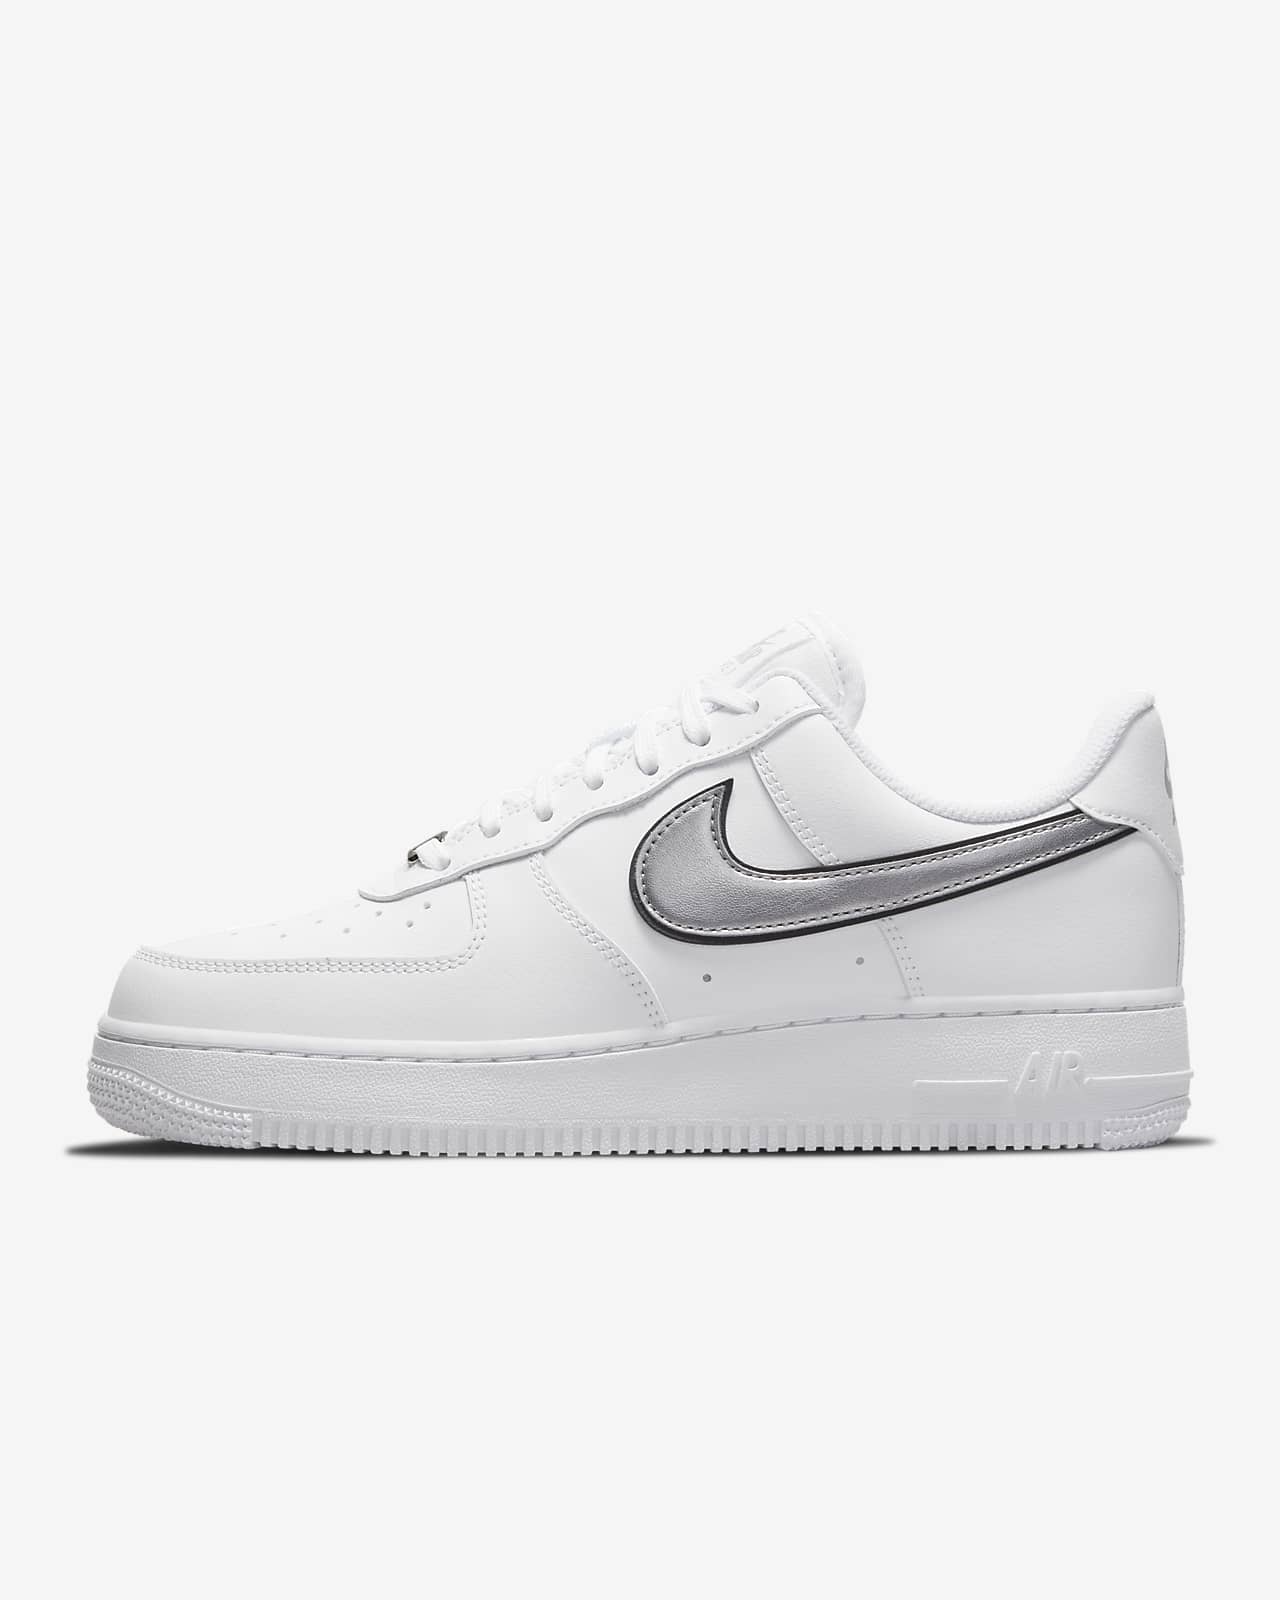 air force 1 bianche e rosse donna